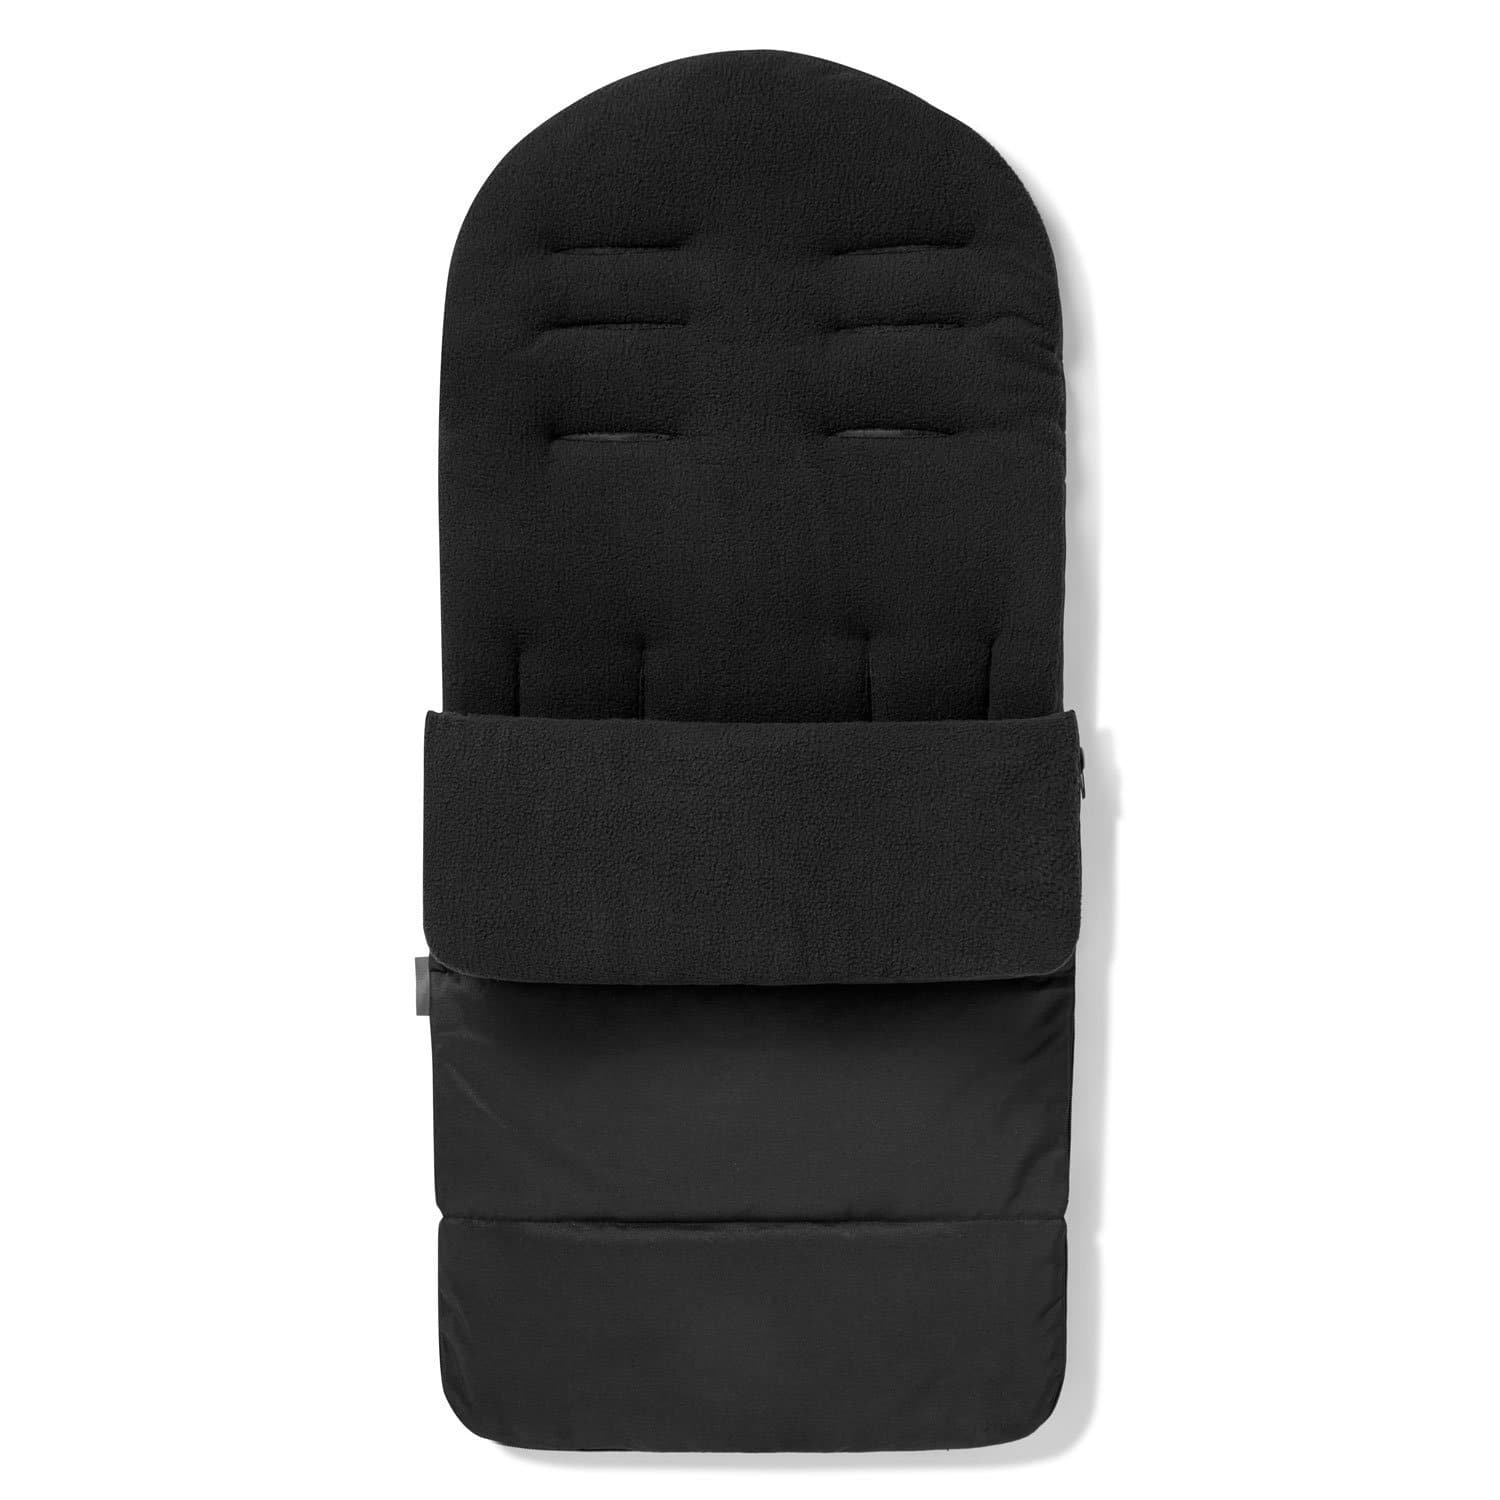 Premium Footmuff / Cosy Toes Compatible with Bebe 9 - Black Jack / Fits All Models | For Your Little One